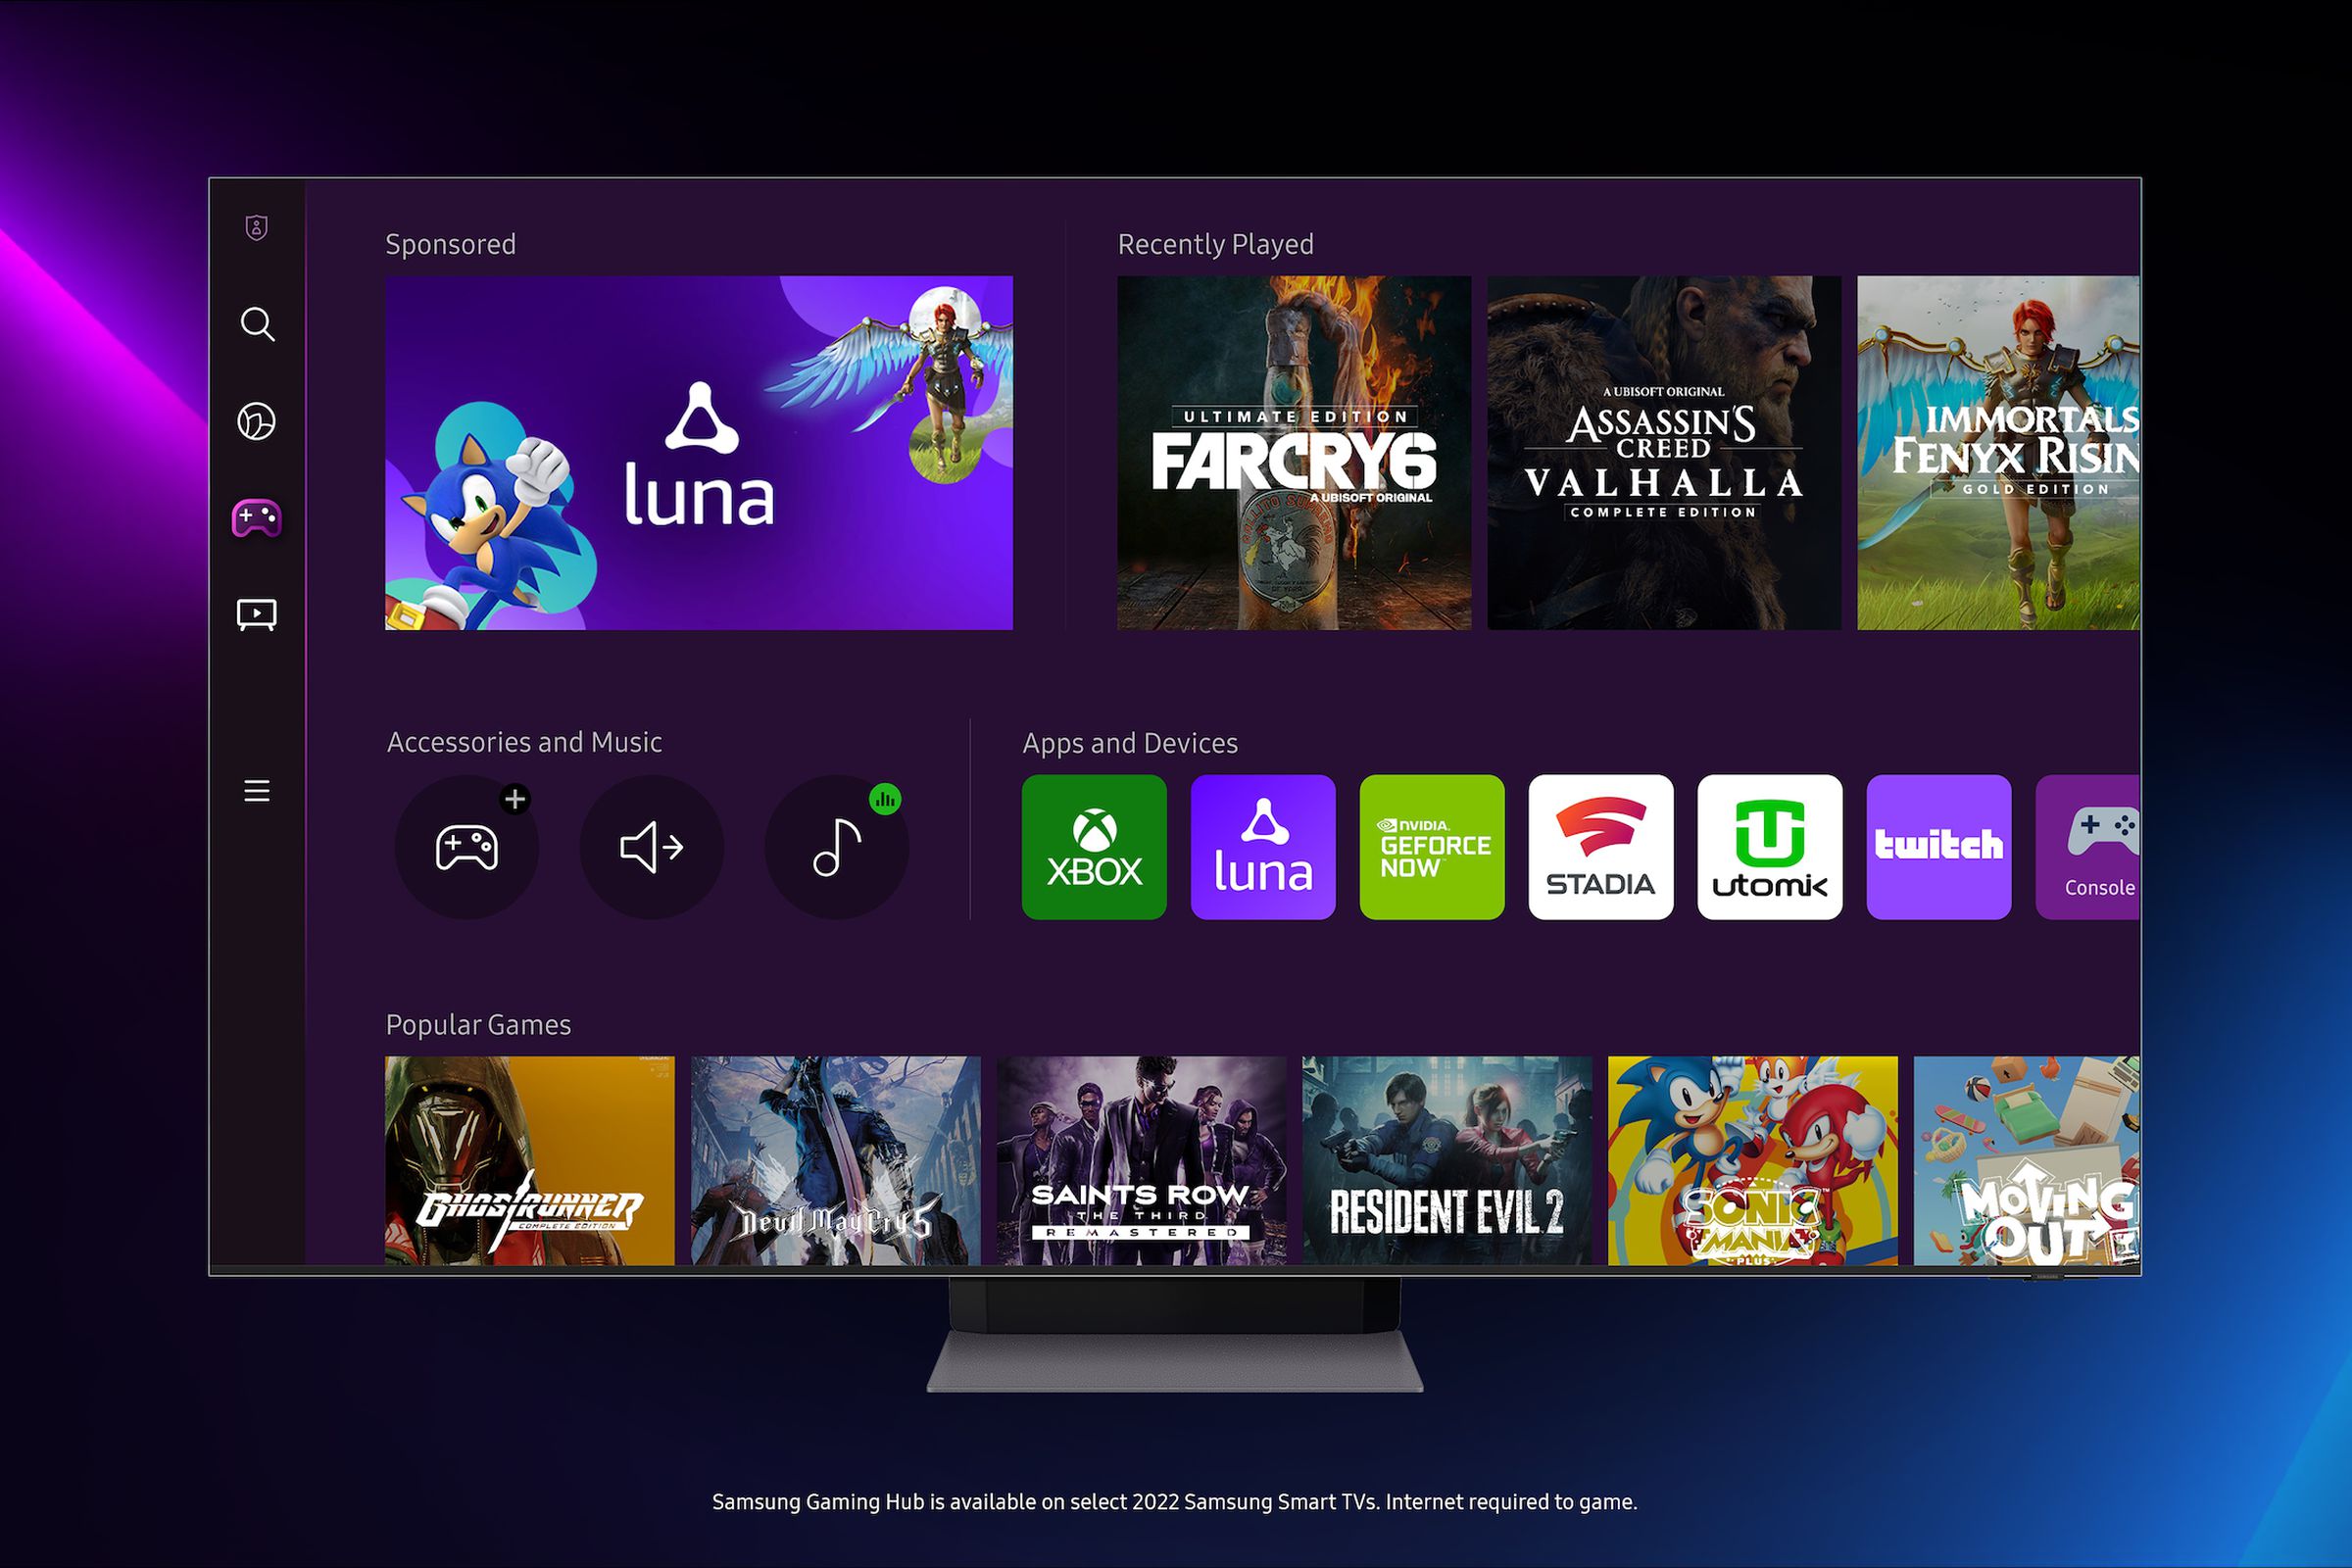 Amazon Luna is now part of the Samsung Gaming Hub.